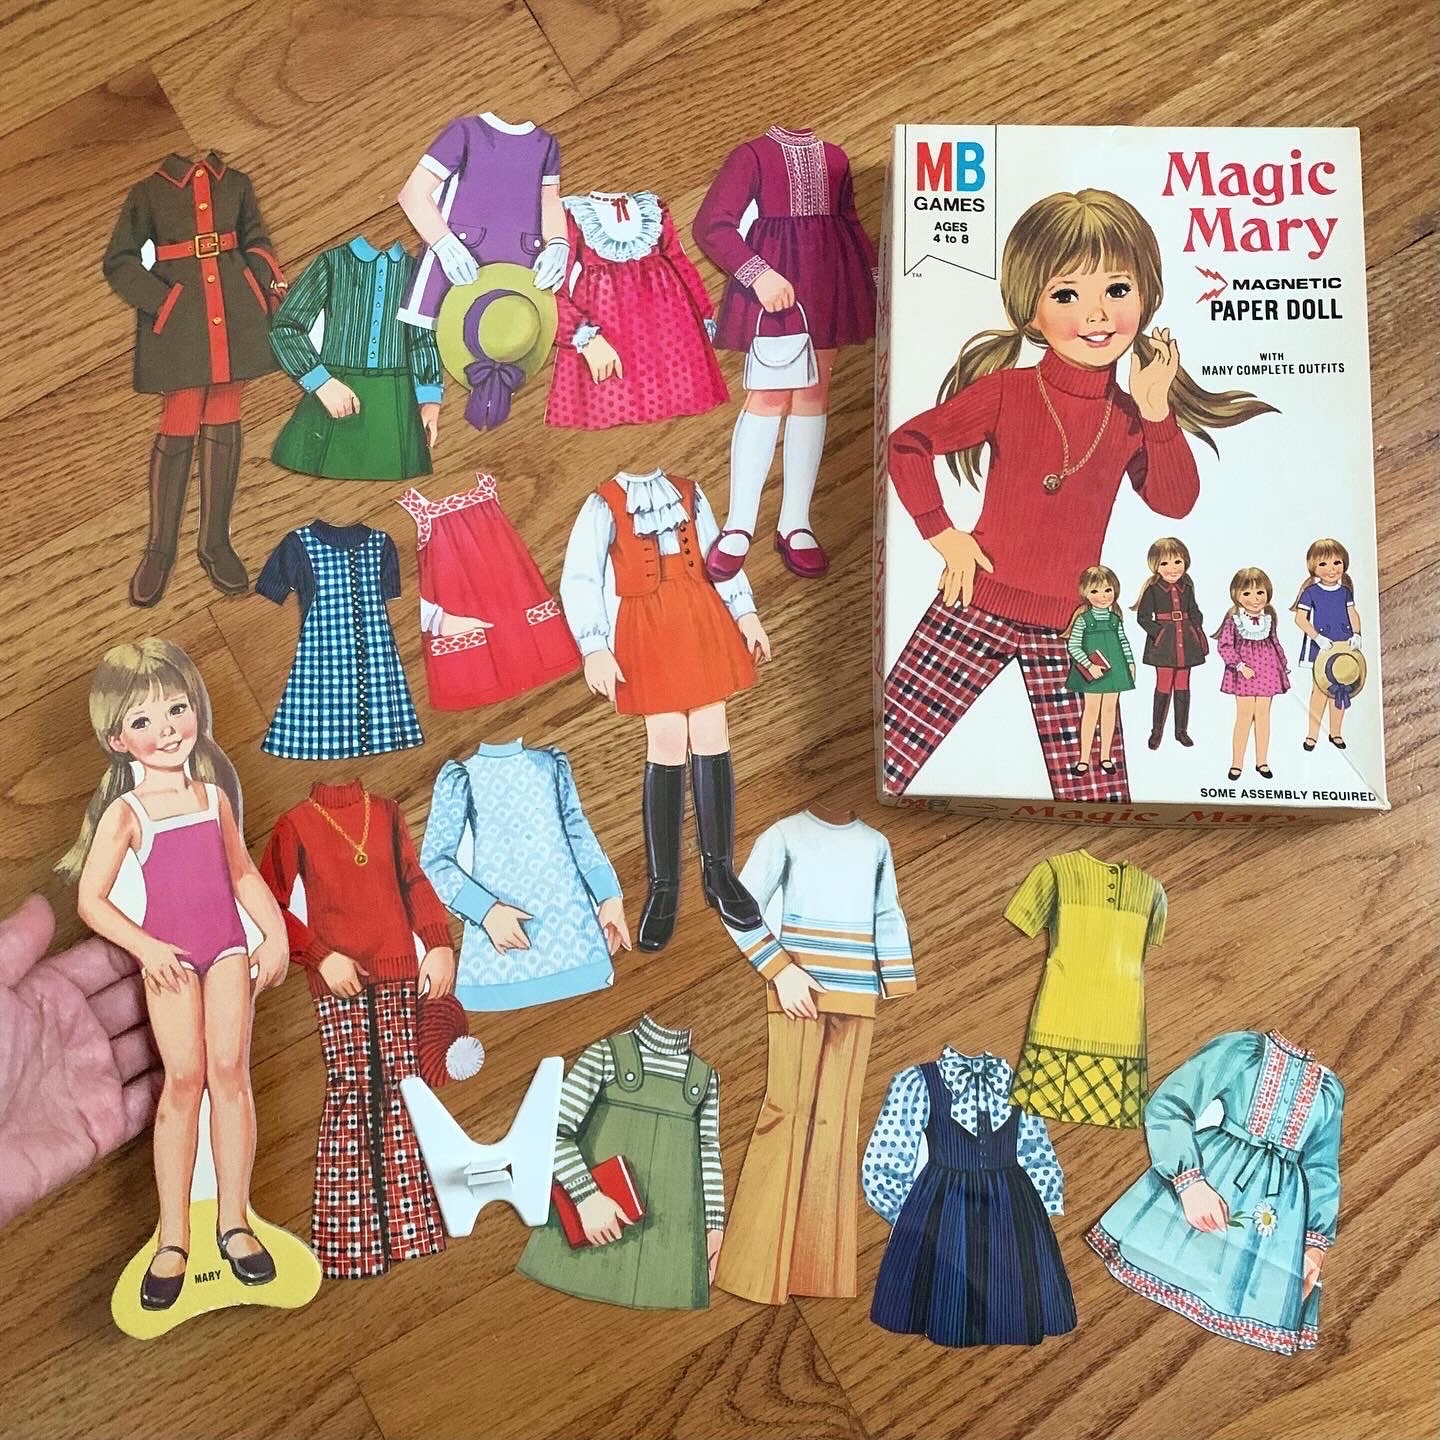 Vintage--1960's--Magnetic Magic Mary--Paper DOLL--Magnet Holds